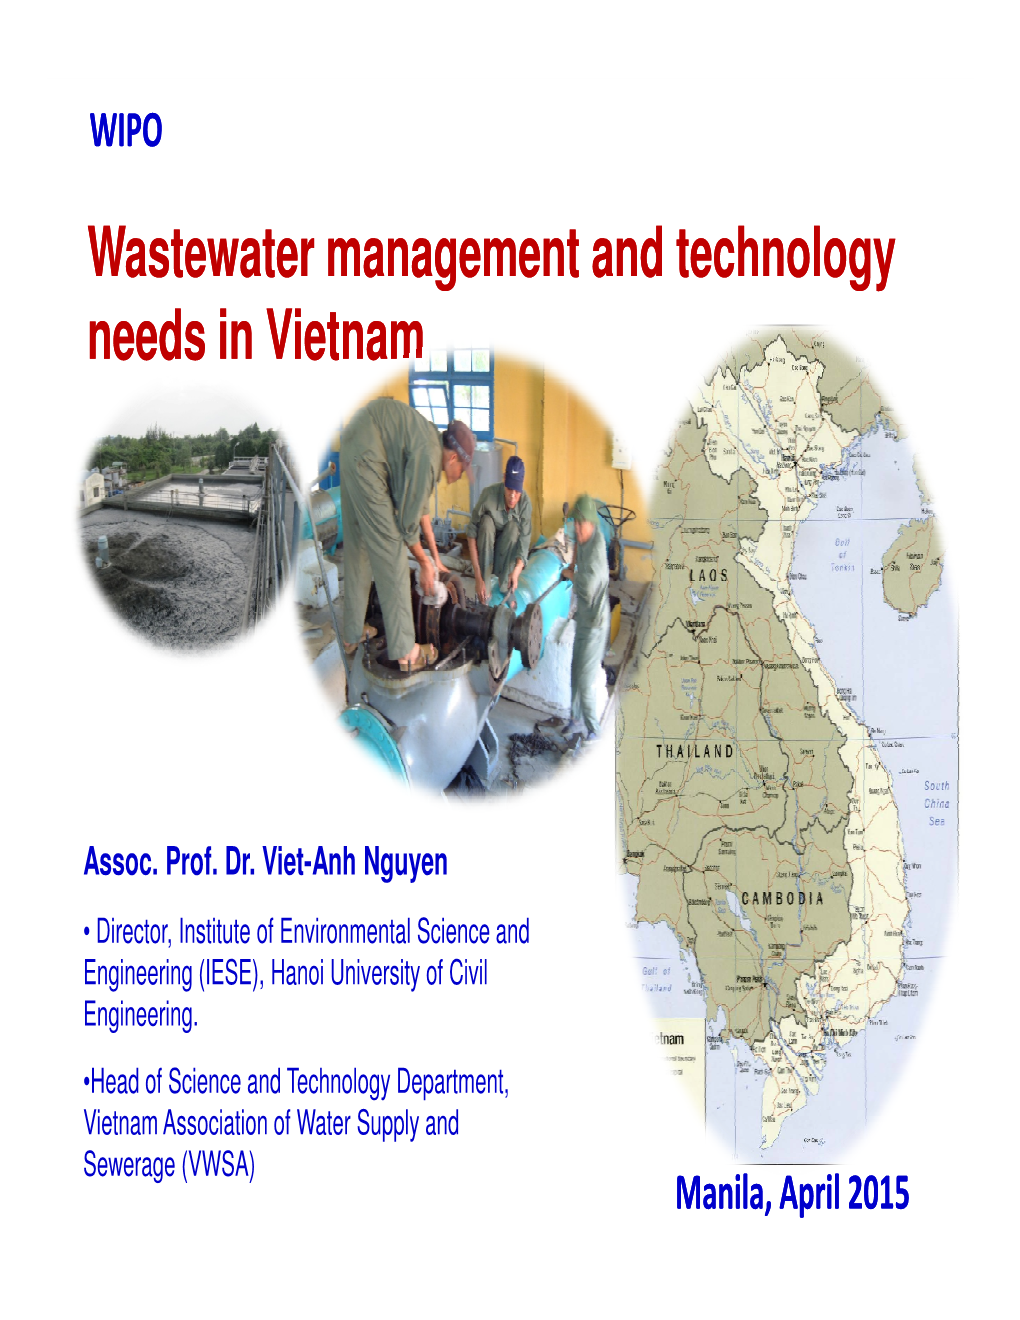 Wastewater Management and Technology Needs in Vietnam